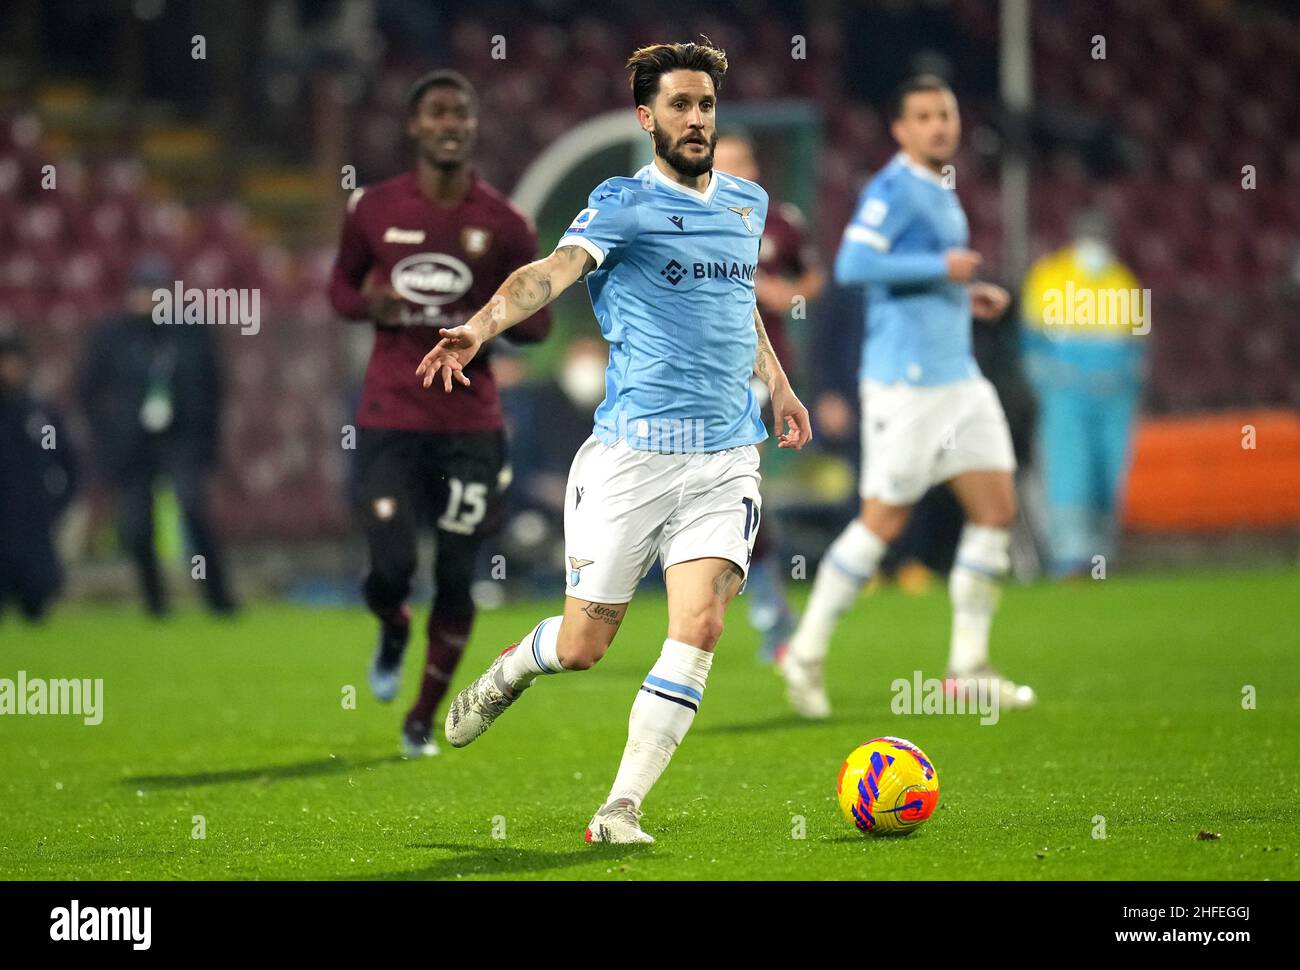 SALERNO, ITALY - JANUARY 15: Luis Alberto of SS Lazio in action ,during the Serie A match between US Salernitana and SS Lazio at Stadio Arechi on January 16, 2022 in Salerno, Italy. (Photo by MB Media) Stock Photo